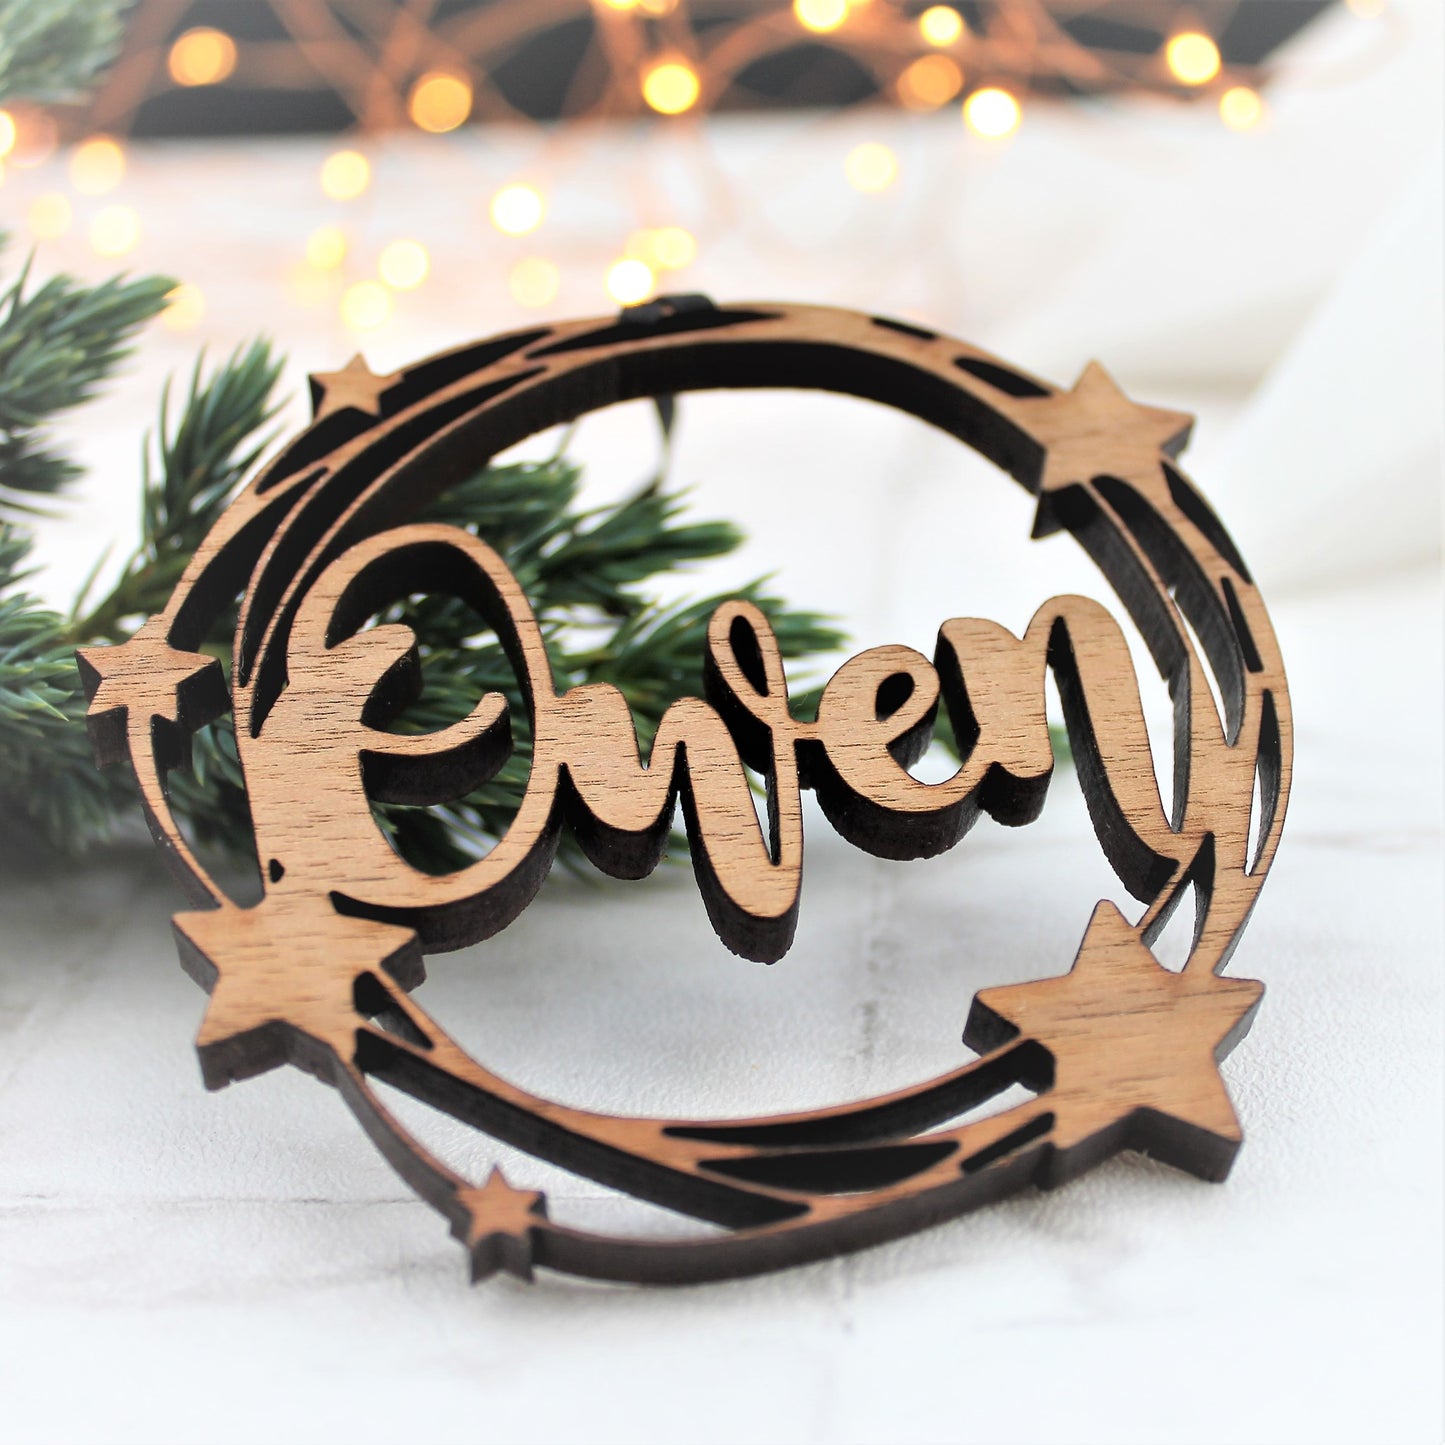 Christmas star bauble with personalised name made from wood with star design